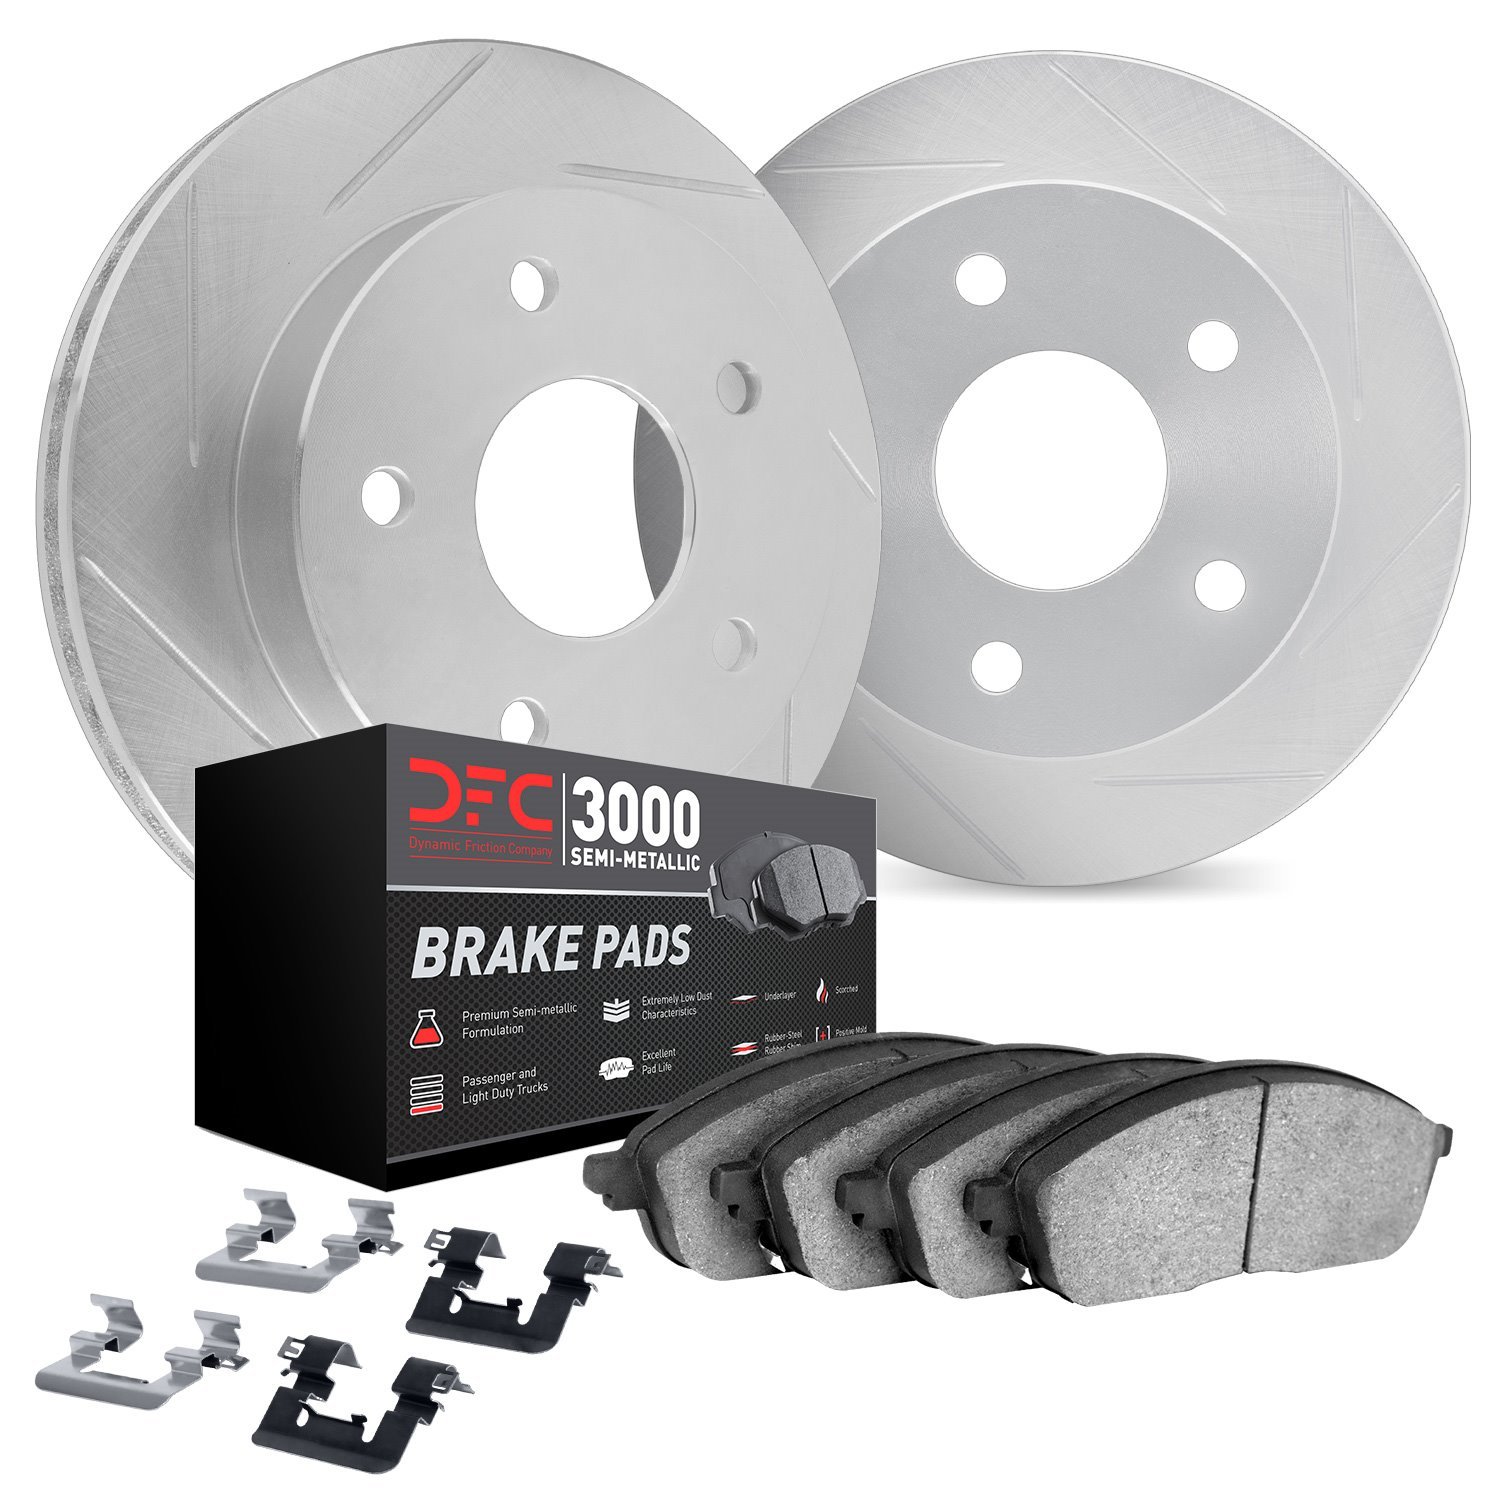 5112-31106 Slotted Brake Rotors with 3000-Series Semi-Metallic Brake Pads Kit & Hardware [Silver], Fits Select BMW, Position: Re